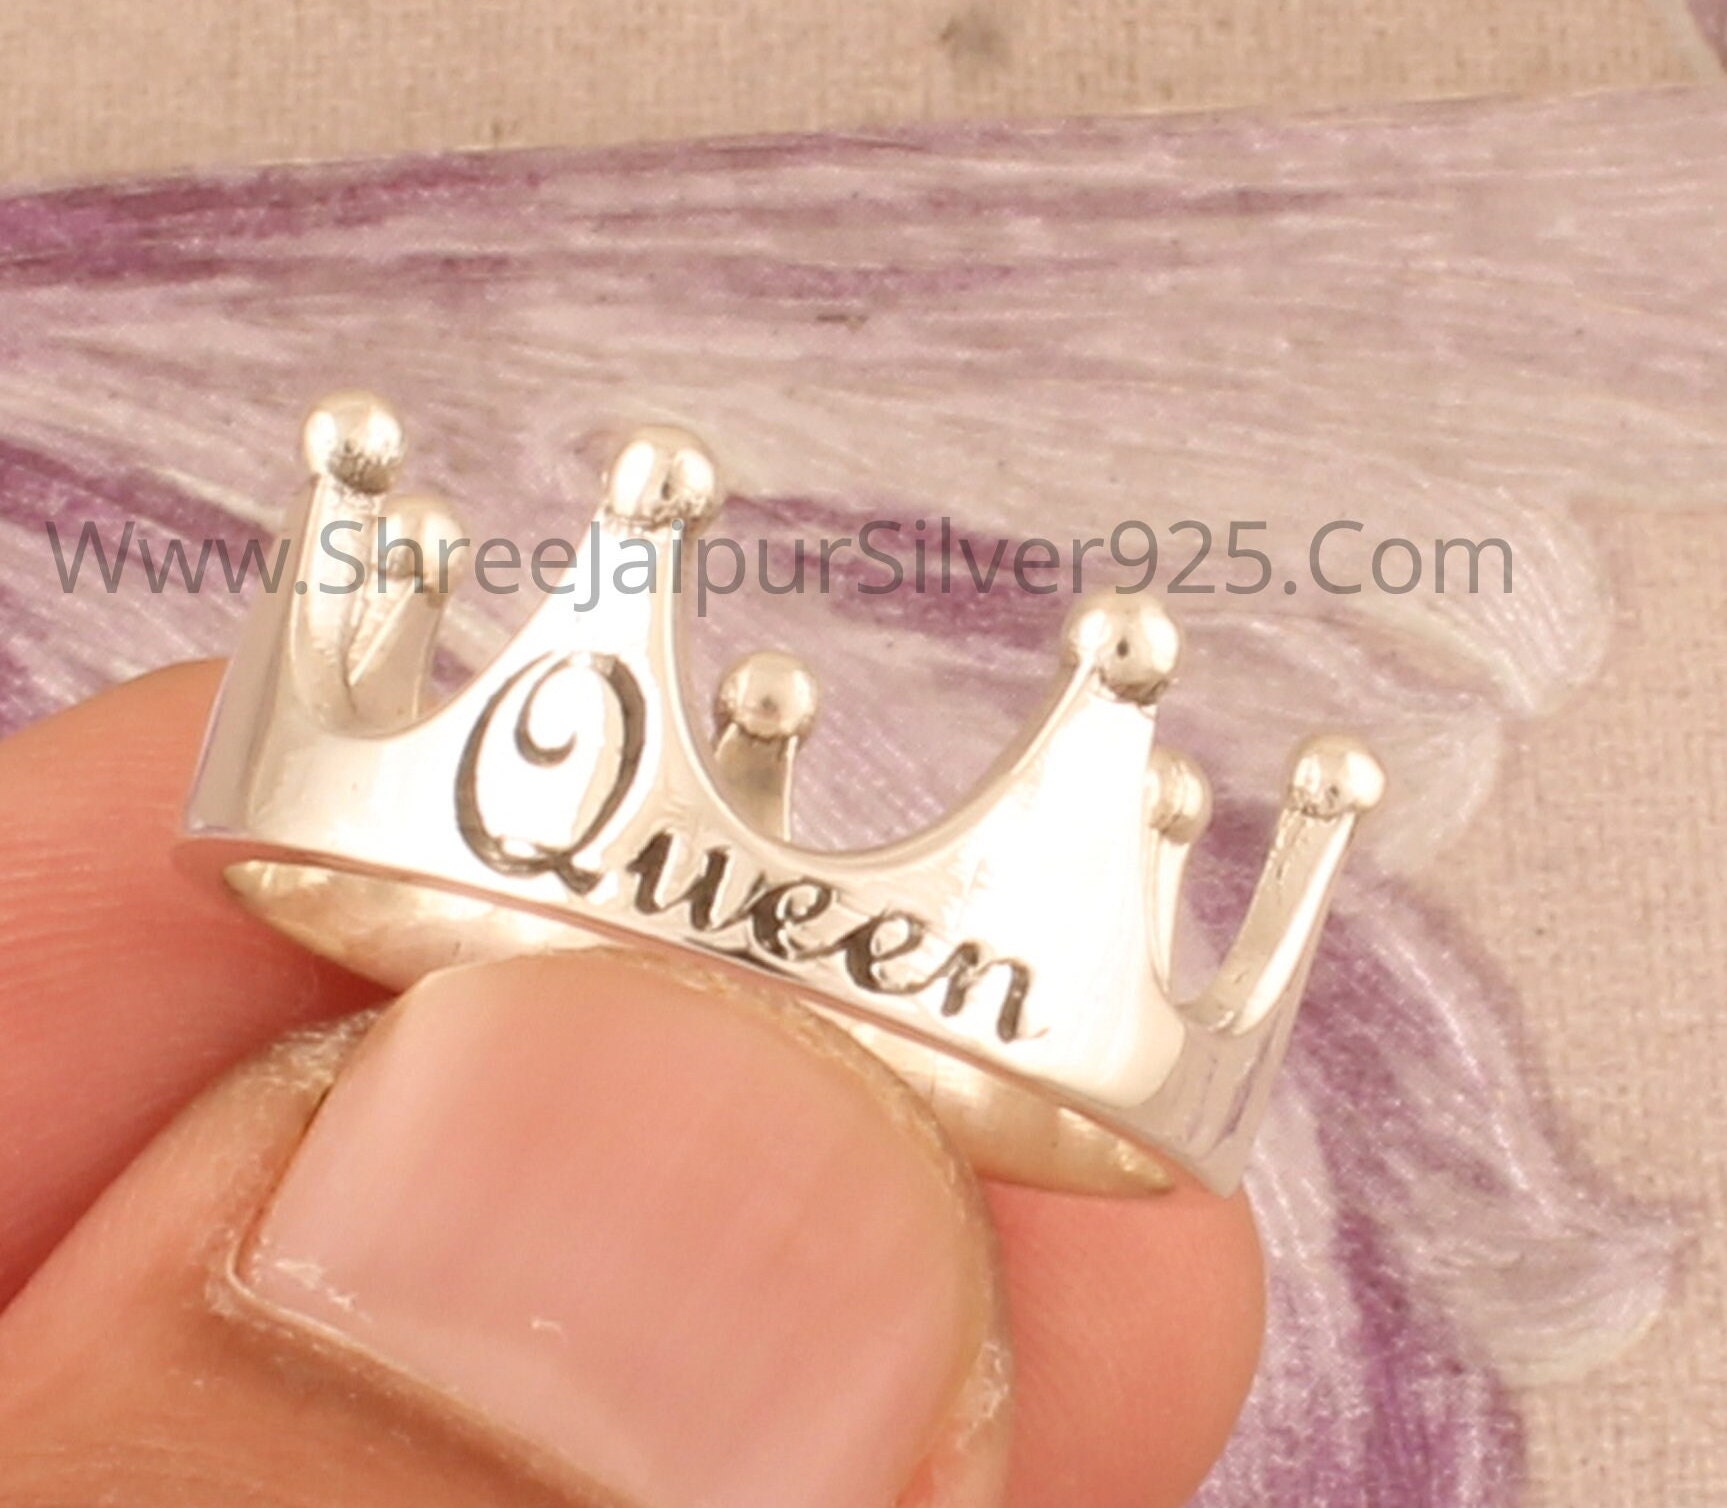 Buy Crown Ring, Princess Ring, Gold Crown Ring, Gold Princess Ring, Tiara  Ring, Gold Ring, Queen Ring, Princess Crown Ring,sweet 16,quinceanera  Online in India - Etsy